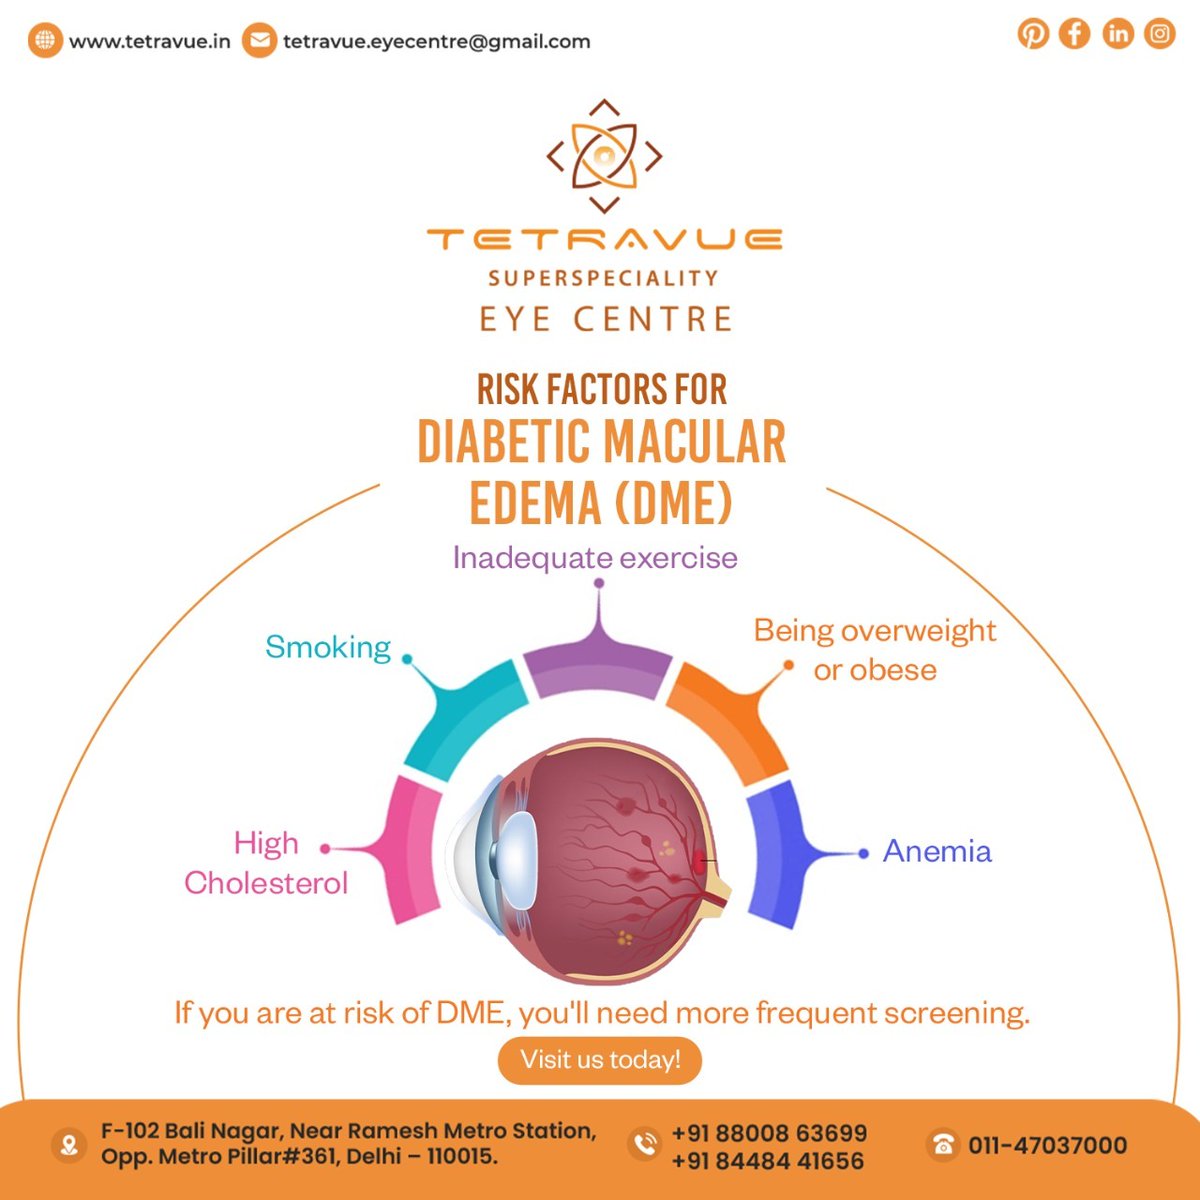 DME is a complication of diabetes caused by fluid accumulation in the macula that can affect the fovea.
#DME #eyecentre #Tetravue #eyehealth #diabeticmacularedema #diabetes #diabeticeyedisease #drnehagoel #drnehamidha #eyeexam #eyehealth #vision #contactlens #eyedoctor #sight